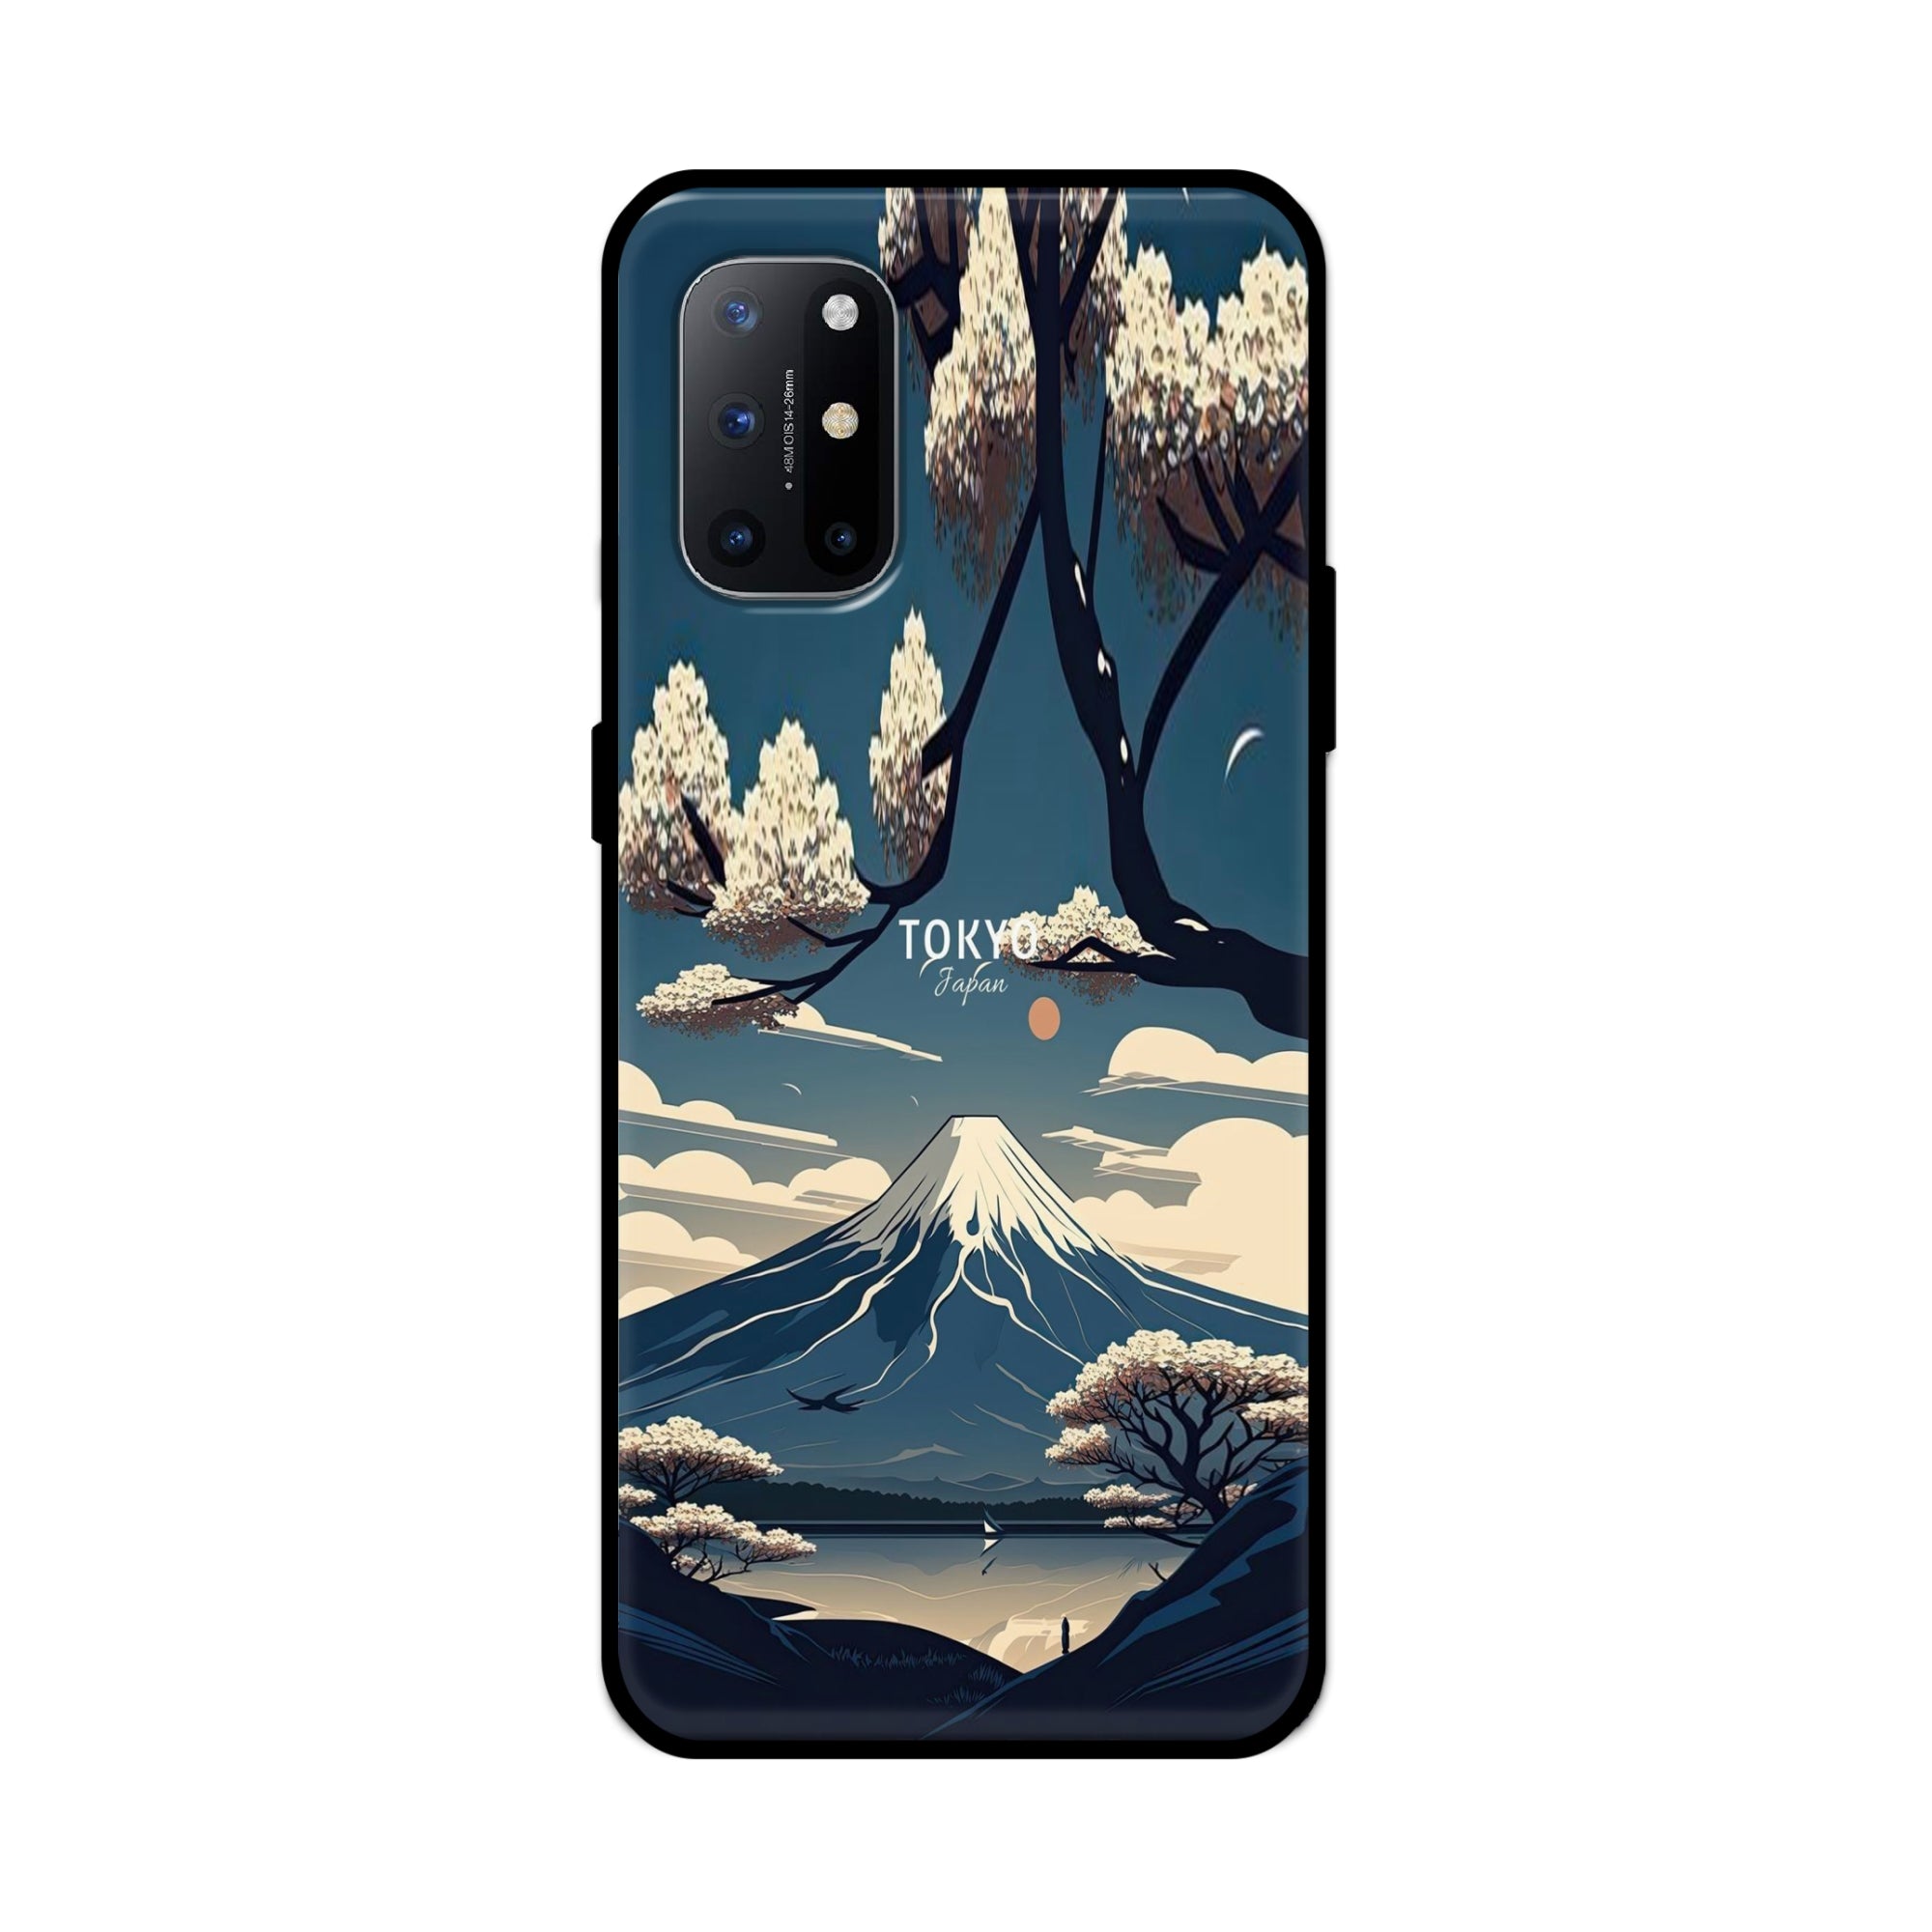 Buy Tokyo Metal-Silicon Back Mobile Phone Case/Cover For Oneplus 9R / 8T Online